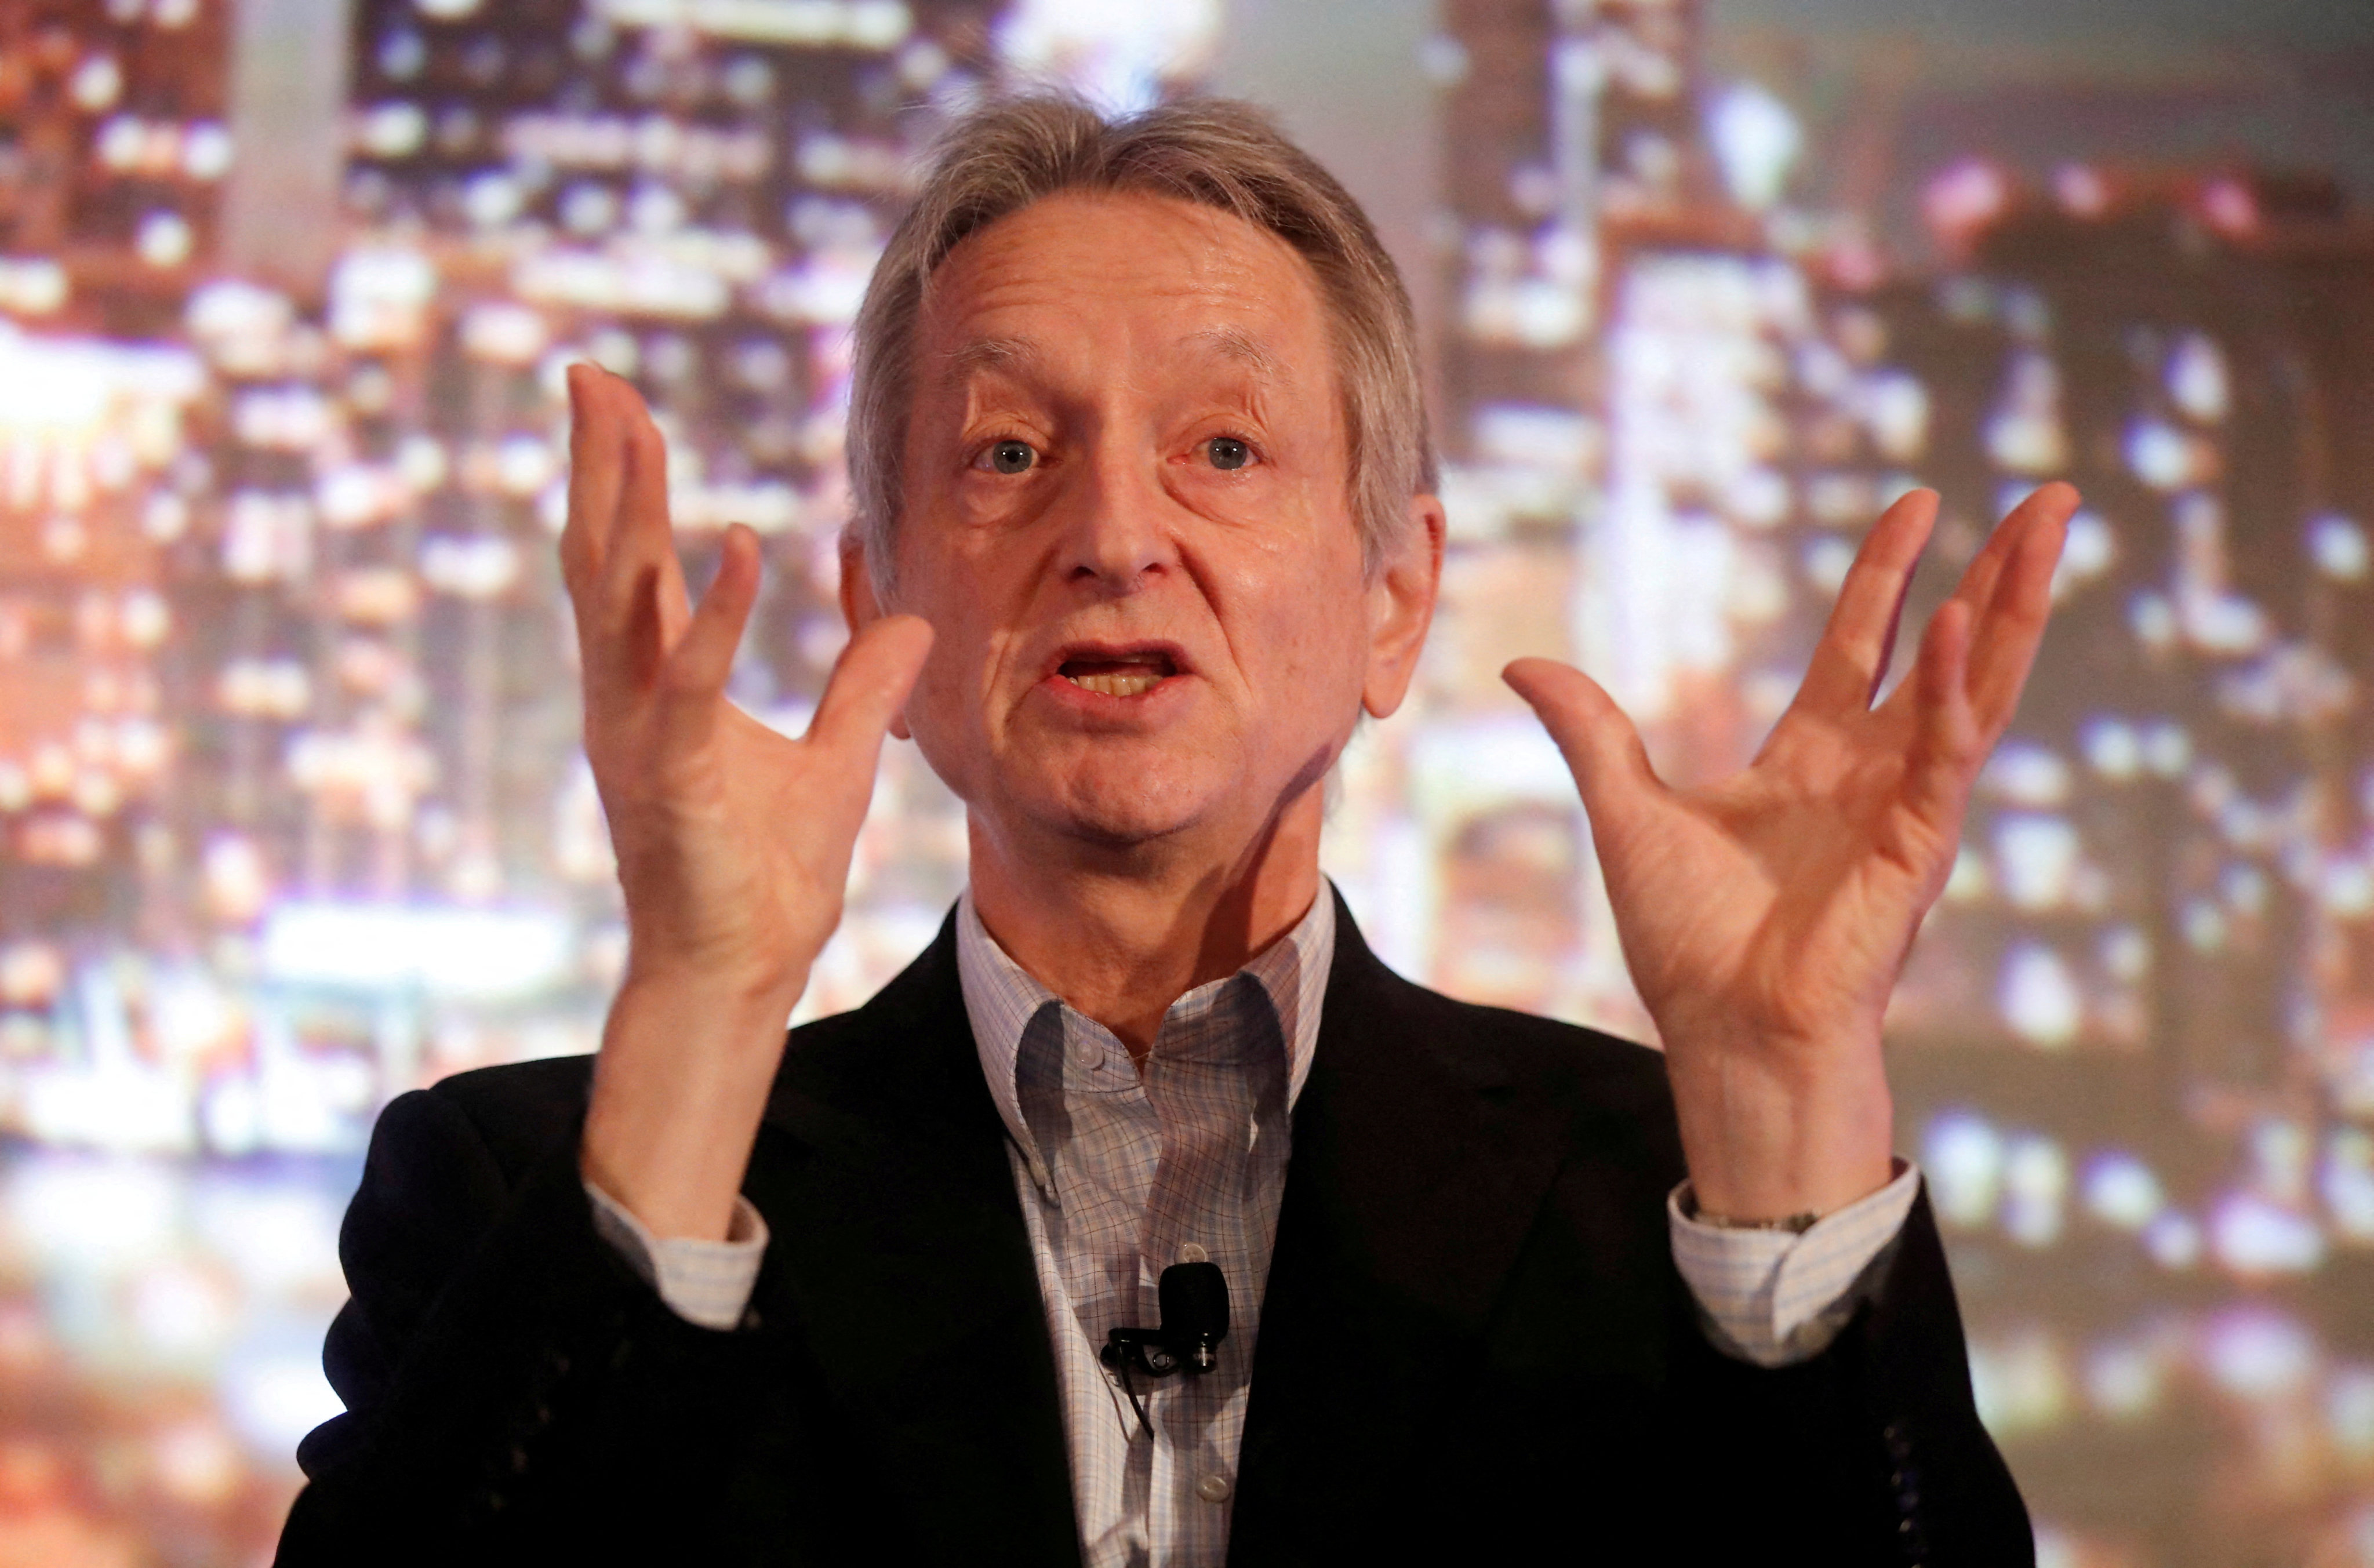 Artificial intelligence pioneer Geoffrey Hinton is known as one of the “godfathers of AI”. Photo: Reuters